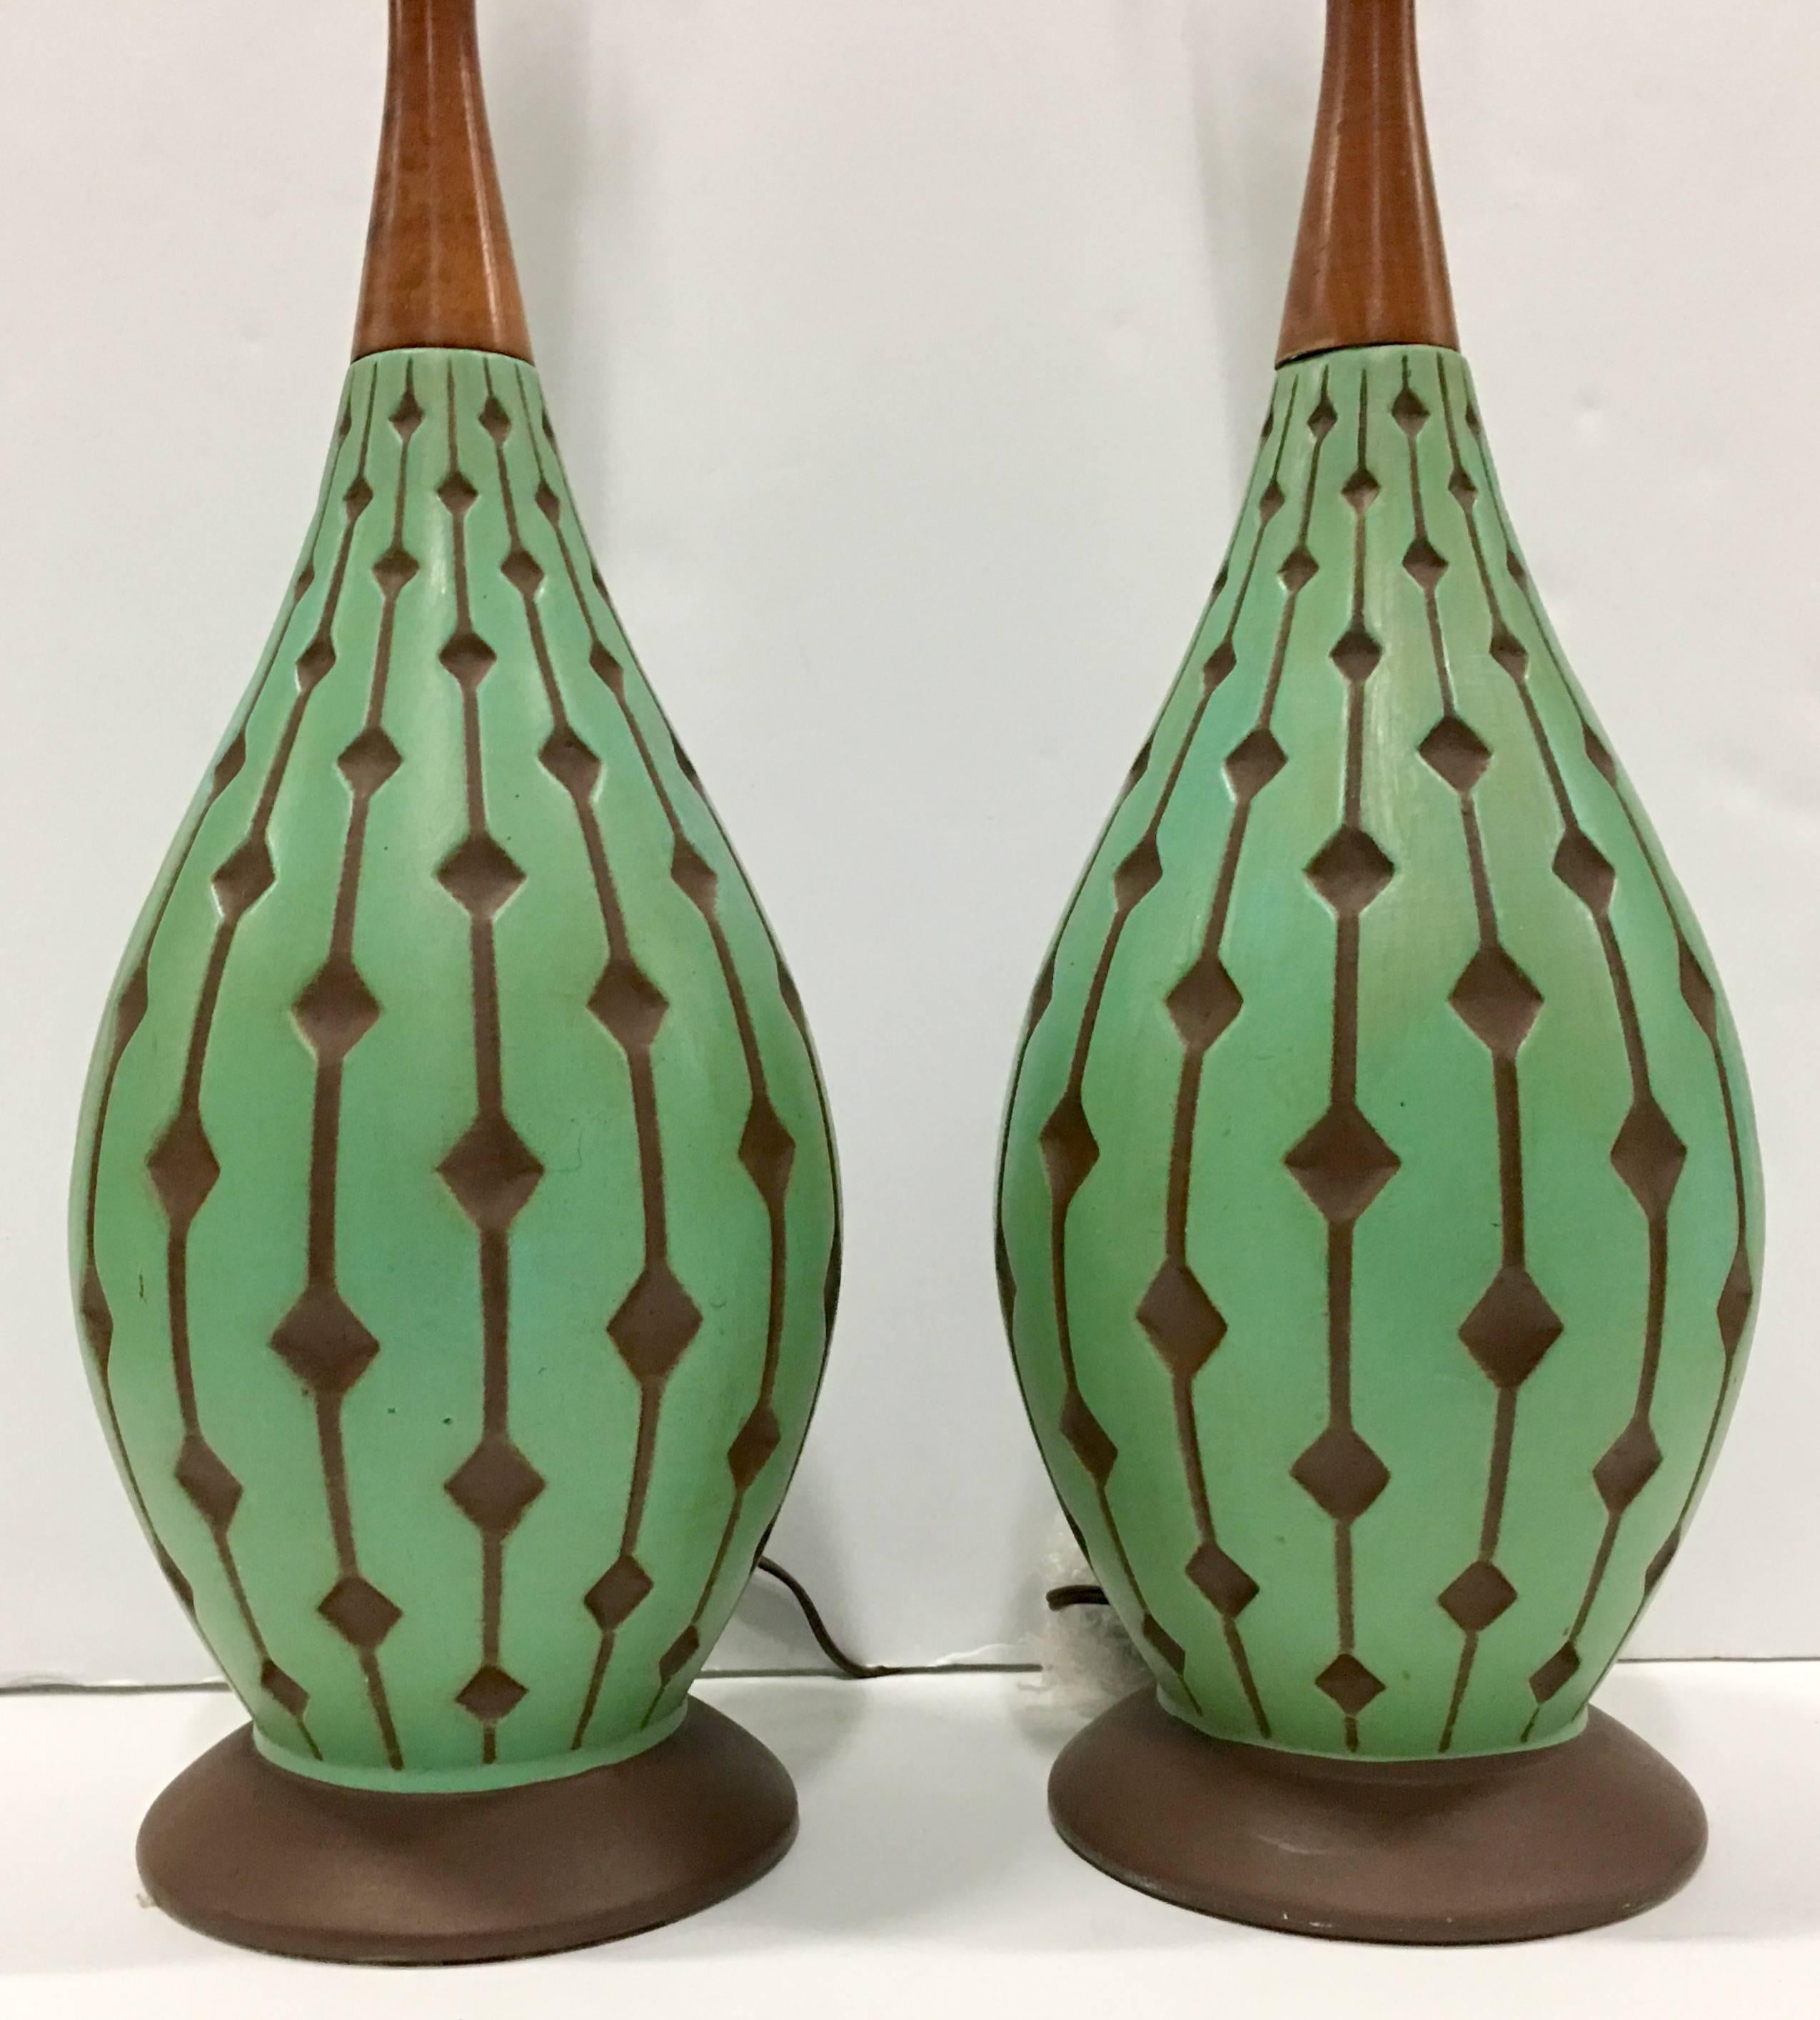 American Mid-Century Modern Ceramic and Walnut Hand Painted Bowling Pin Lamp Pai